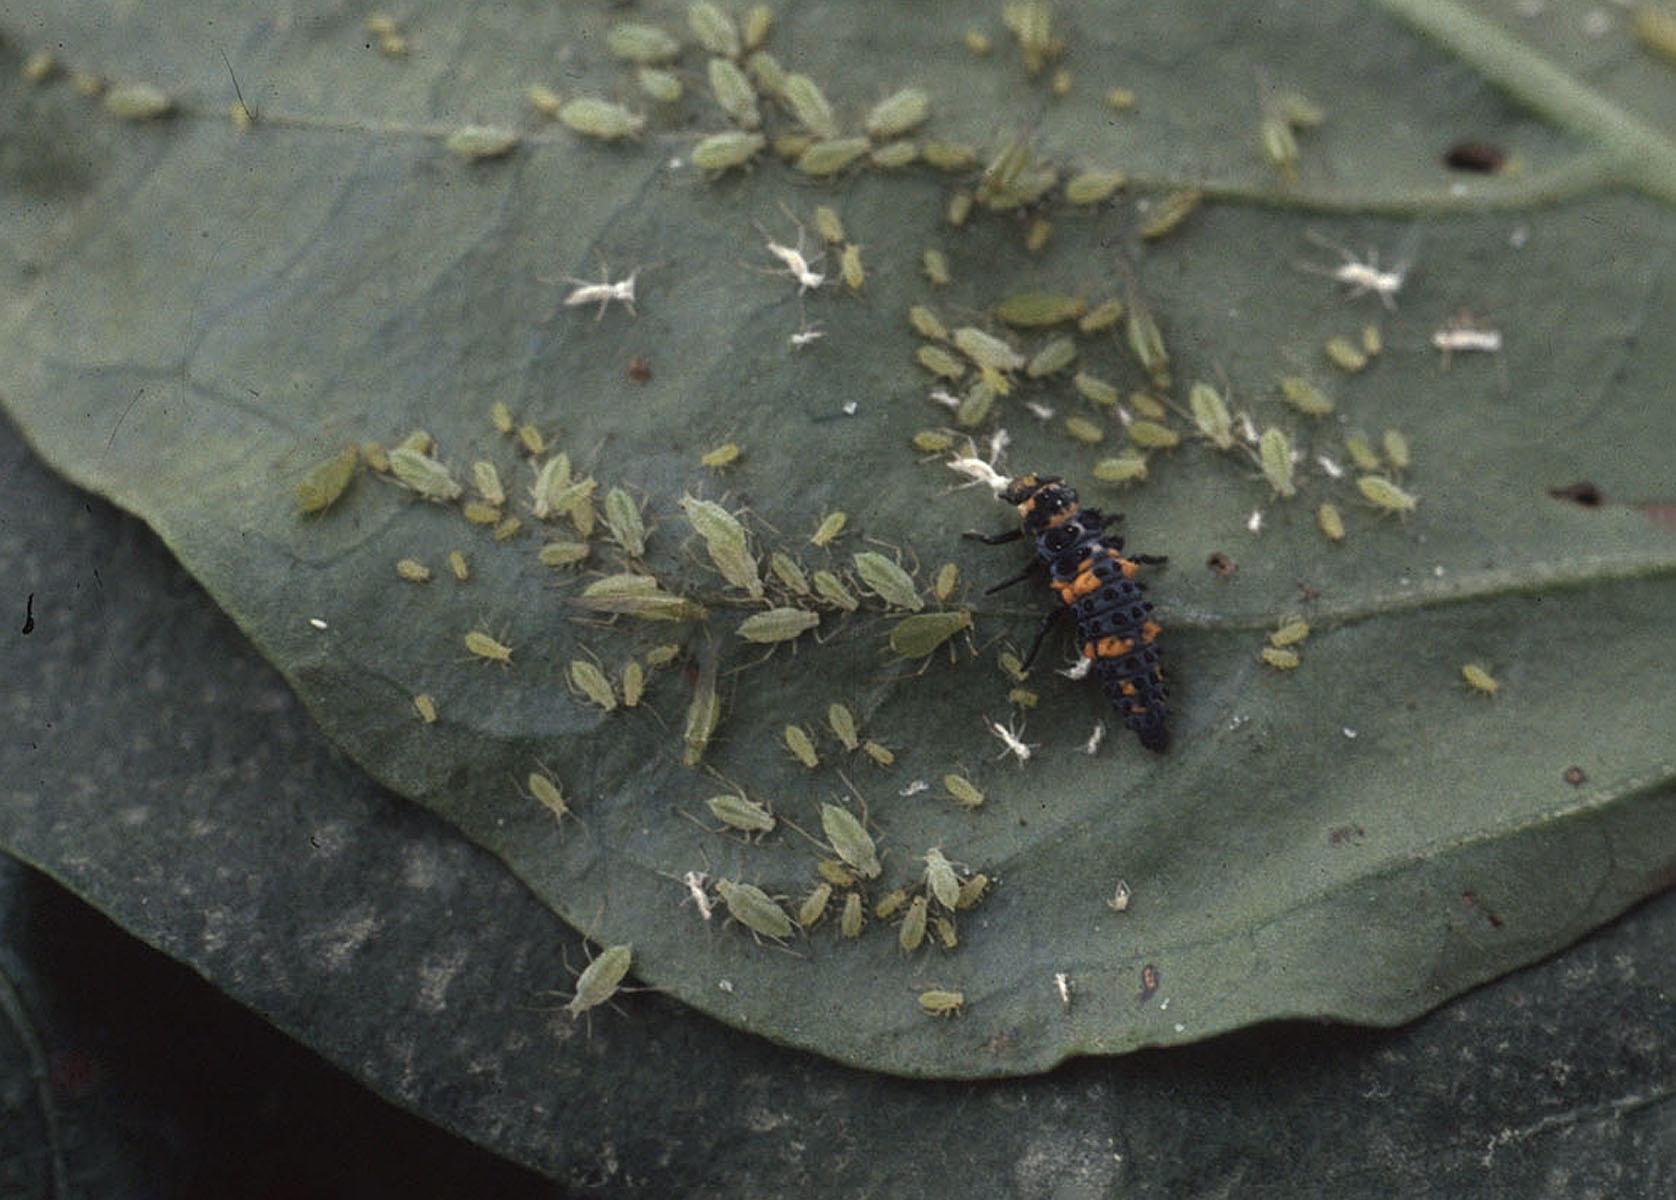 aphids feeding on the underside of a leaf and larger black and orange striped predator larva